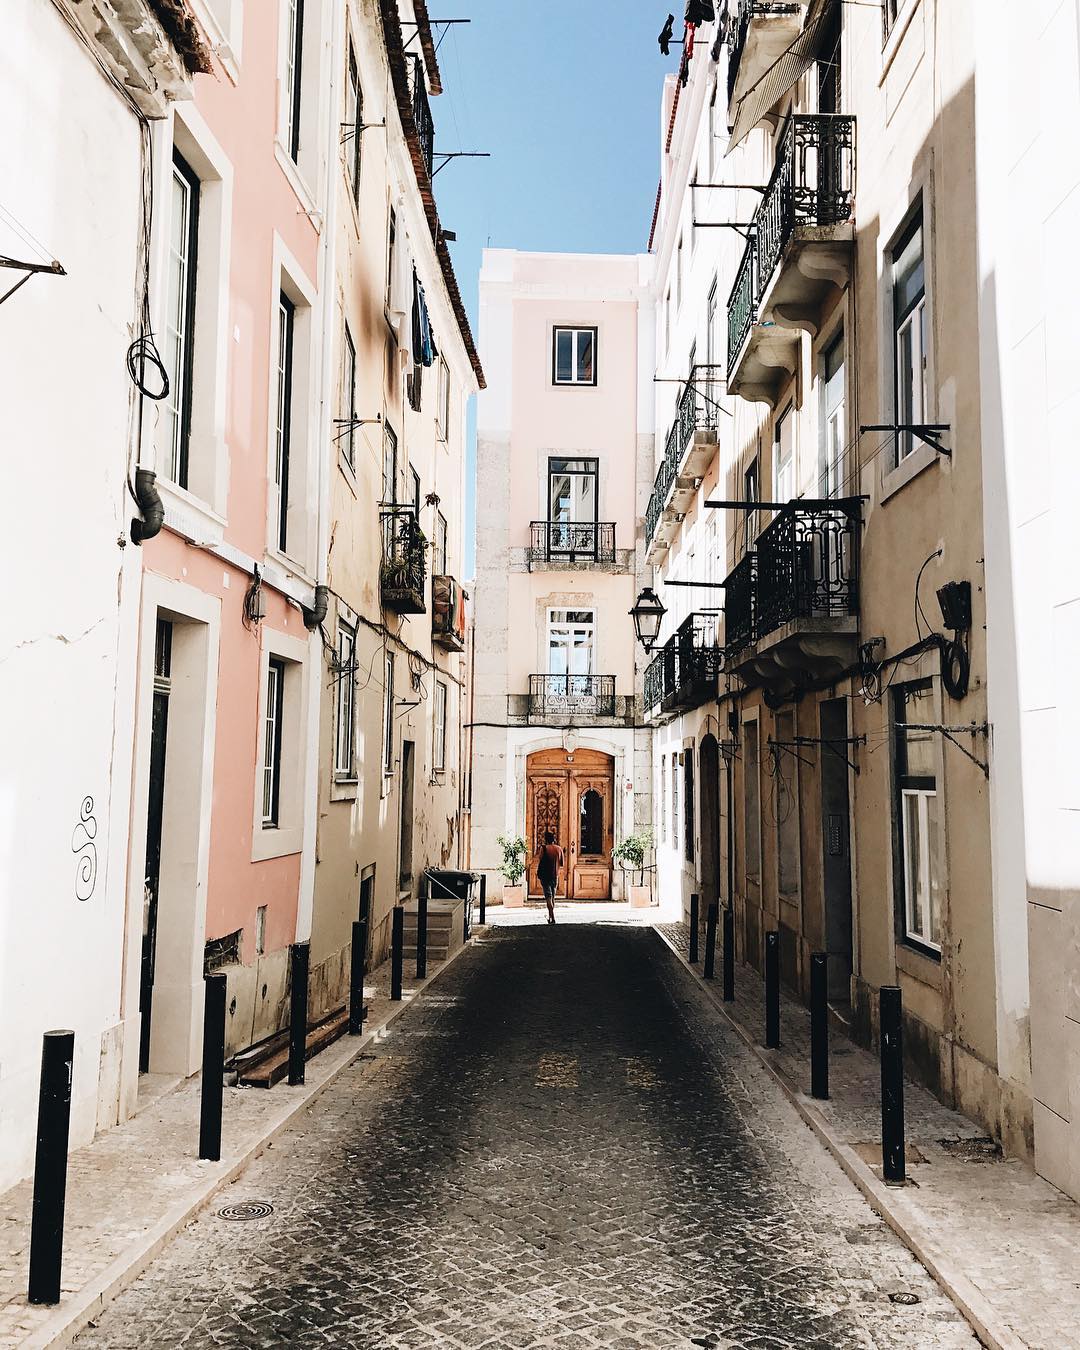 Weekday Wanderlust | Places: Lisbon, Portugal with @andreannu